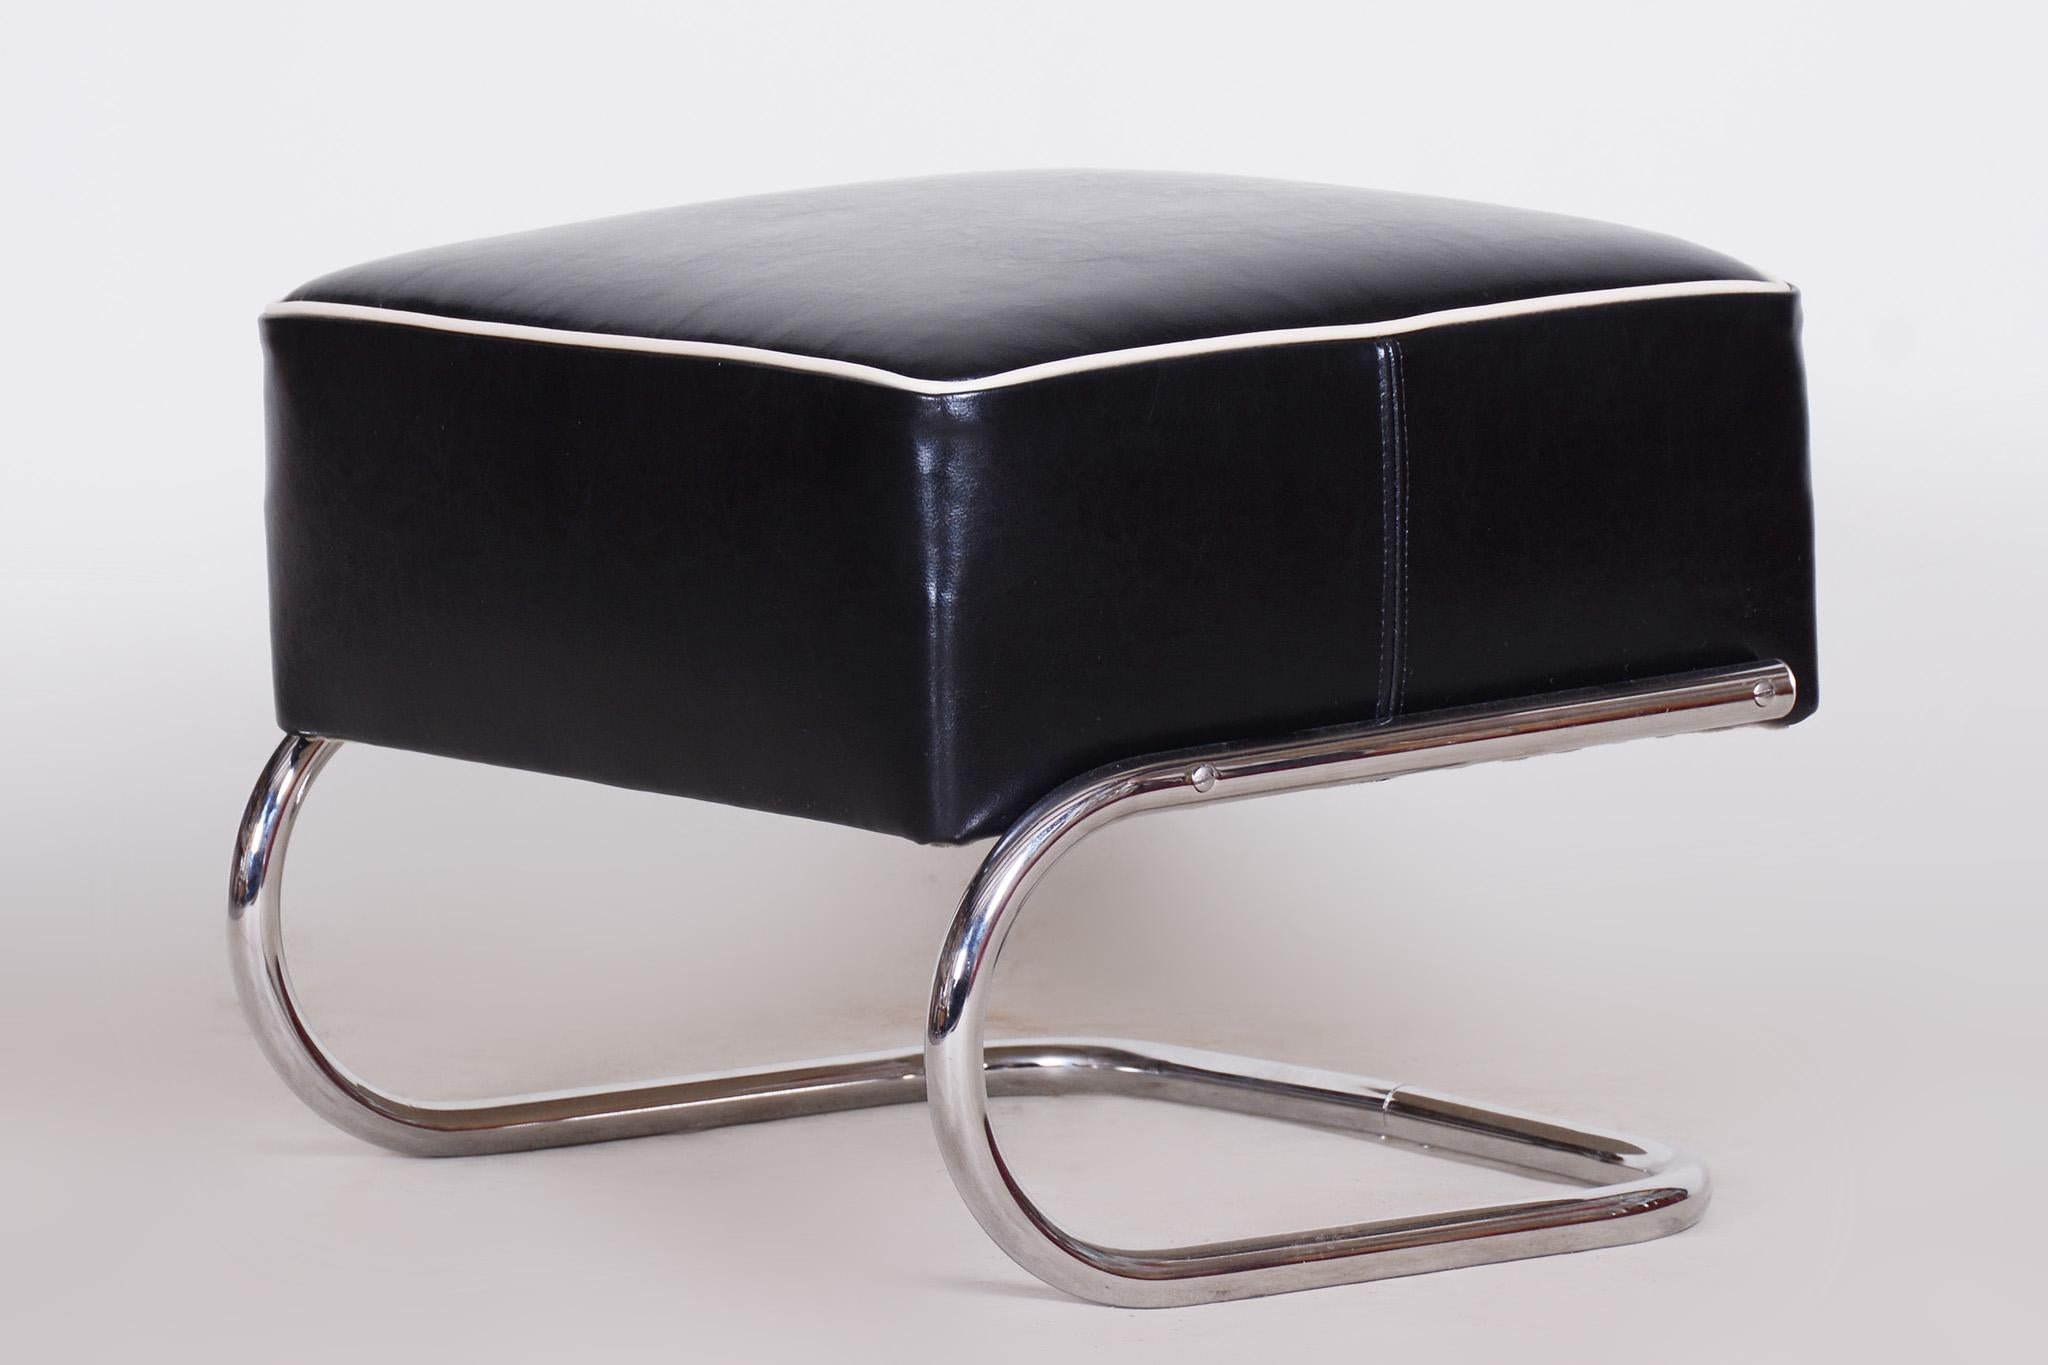 Mid-20th Century Black Leather Foot Stool, 1930s Czechia, Made by Slezák For Sale